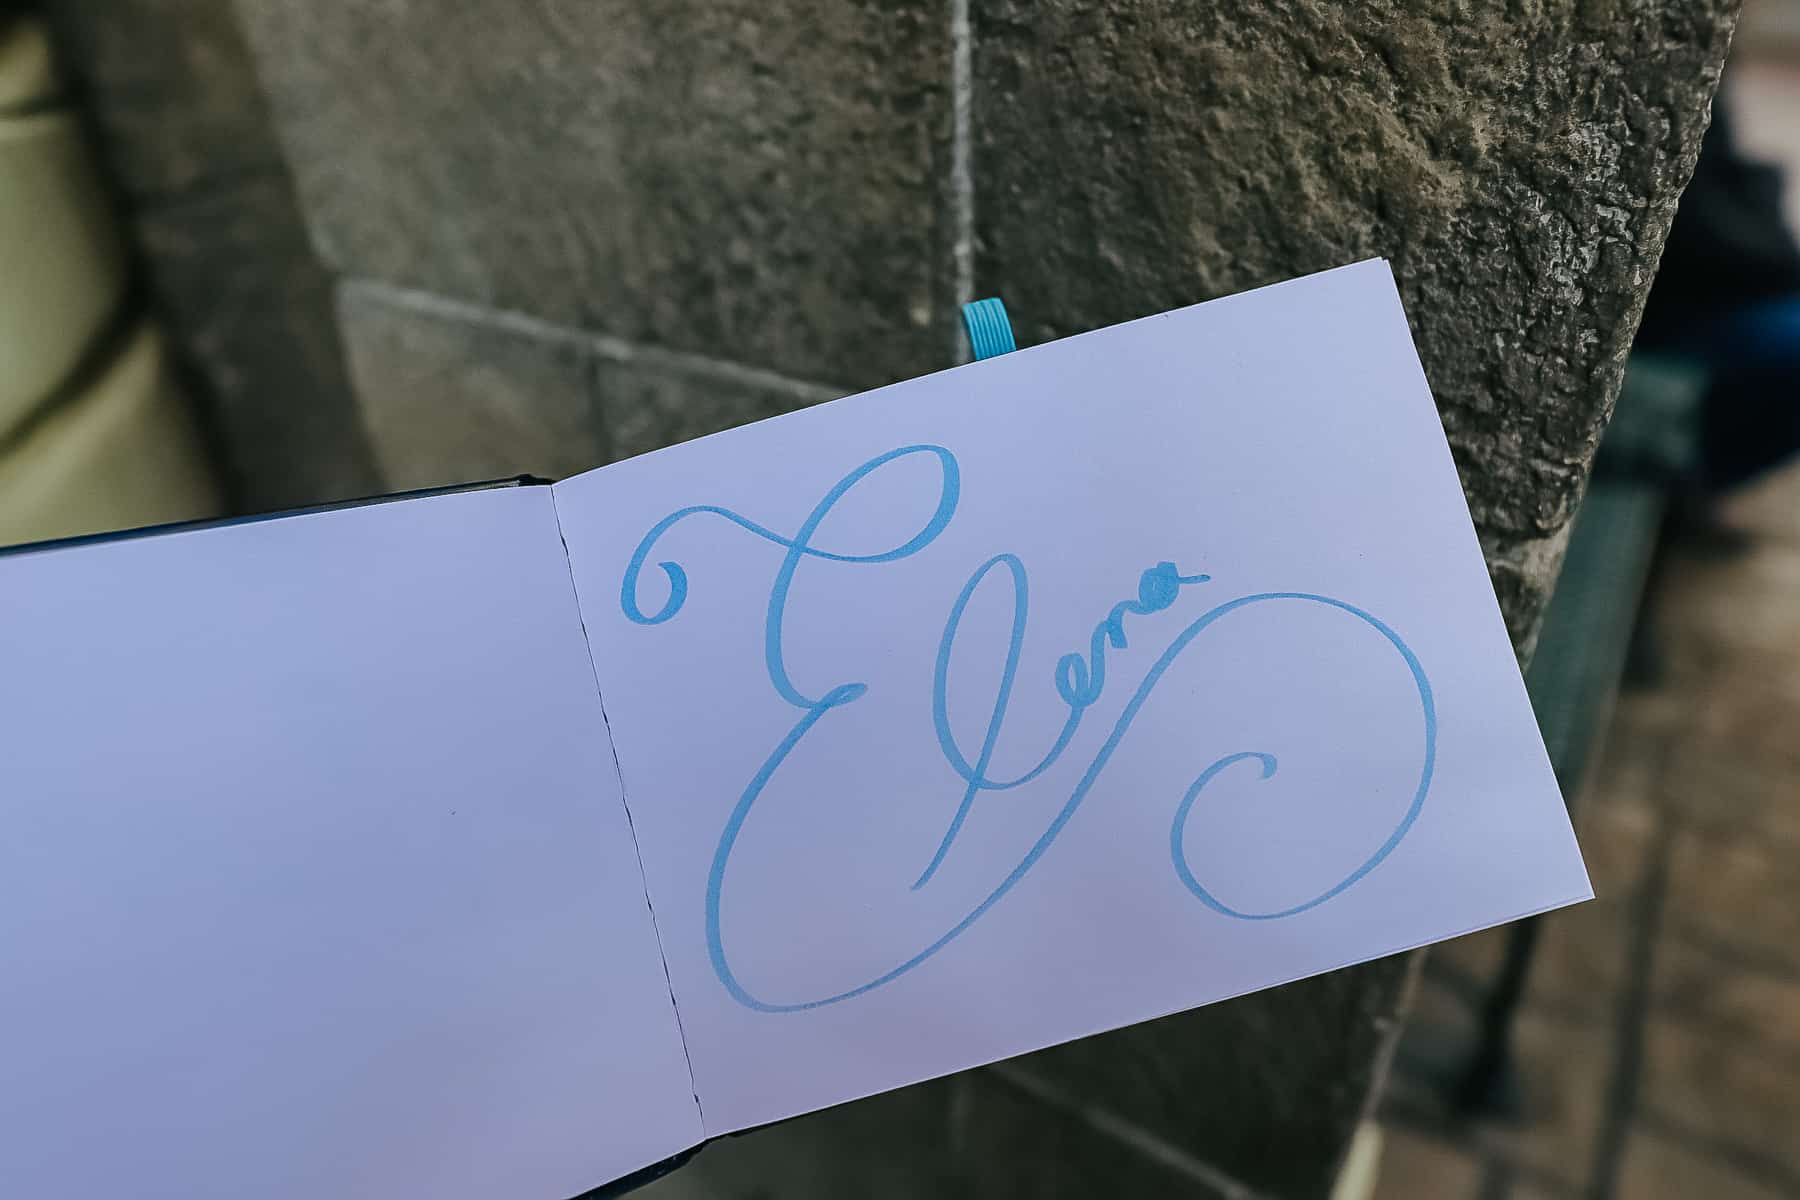 Elena of Avalor's character autograph